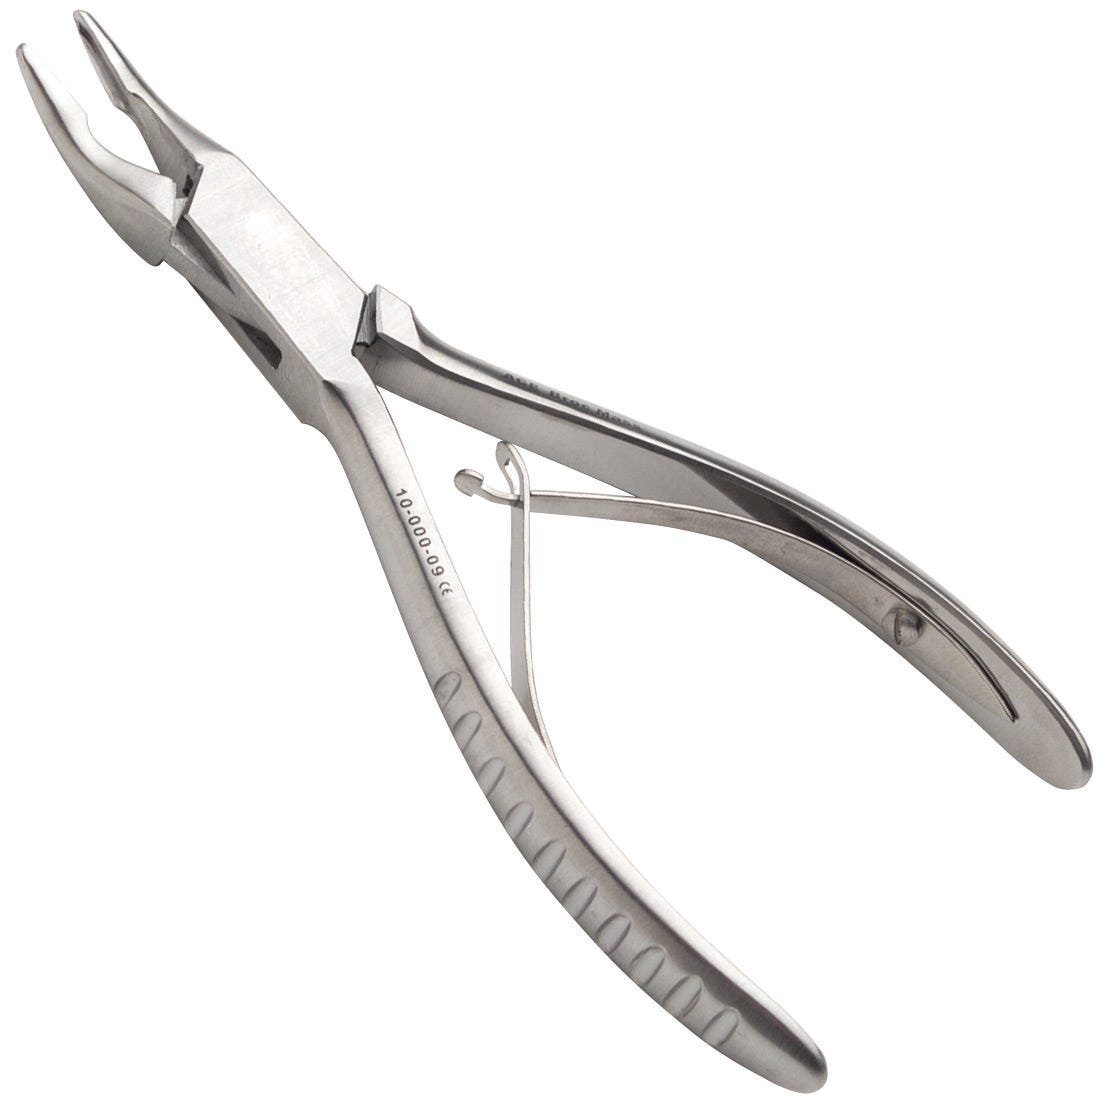 ACE Standard Blumenthal Rongeur, 30 degree angle